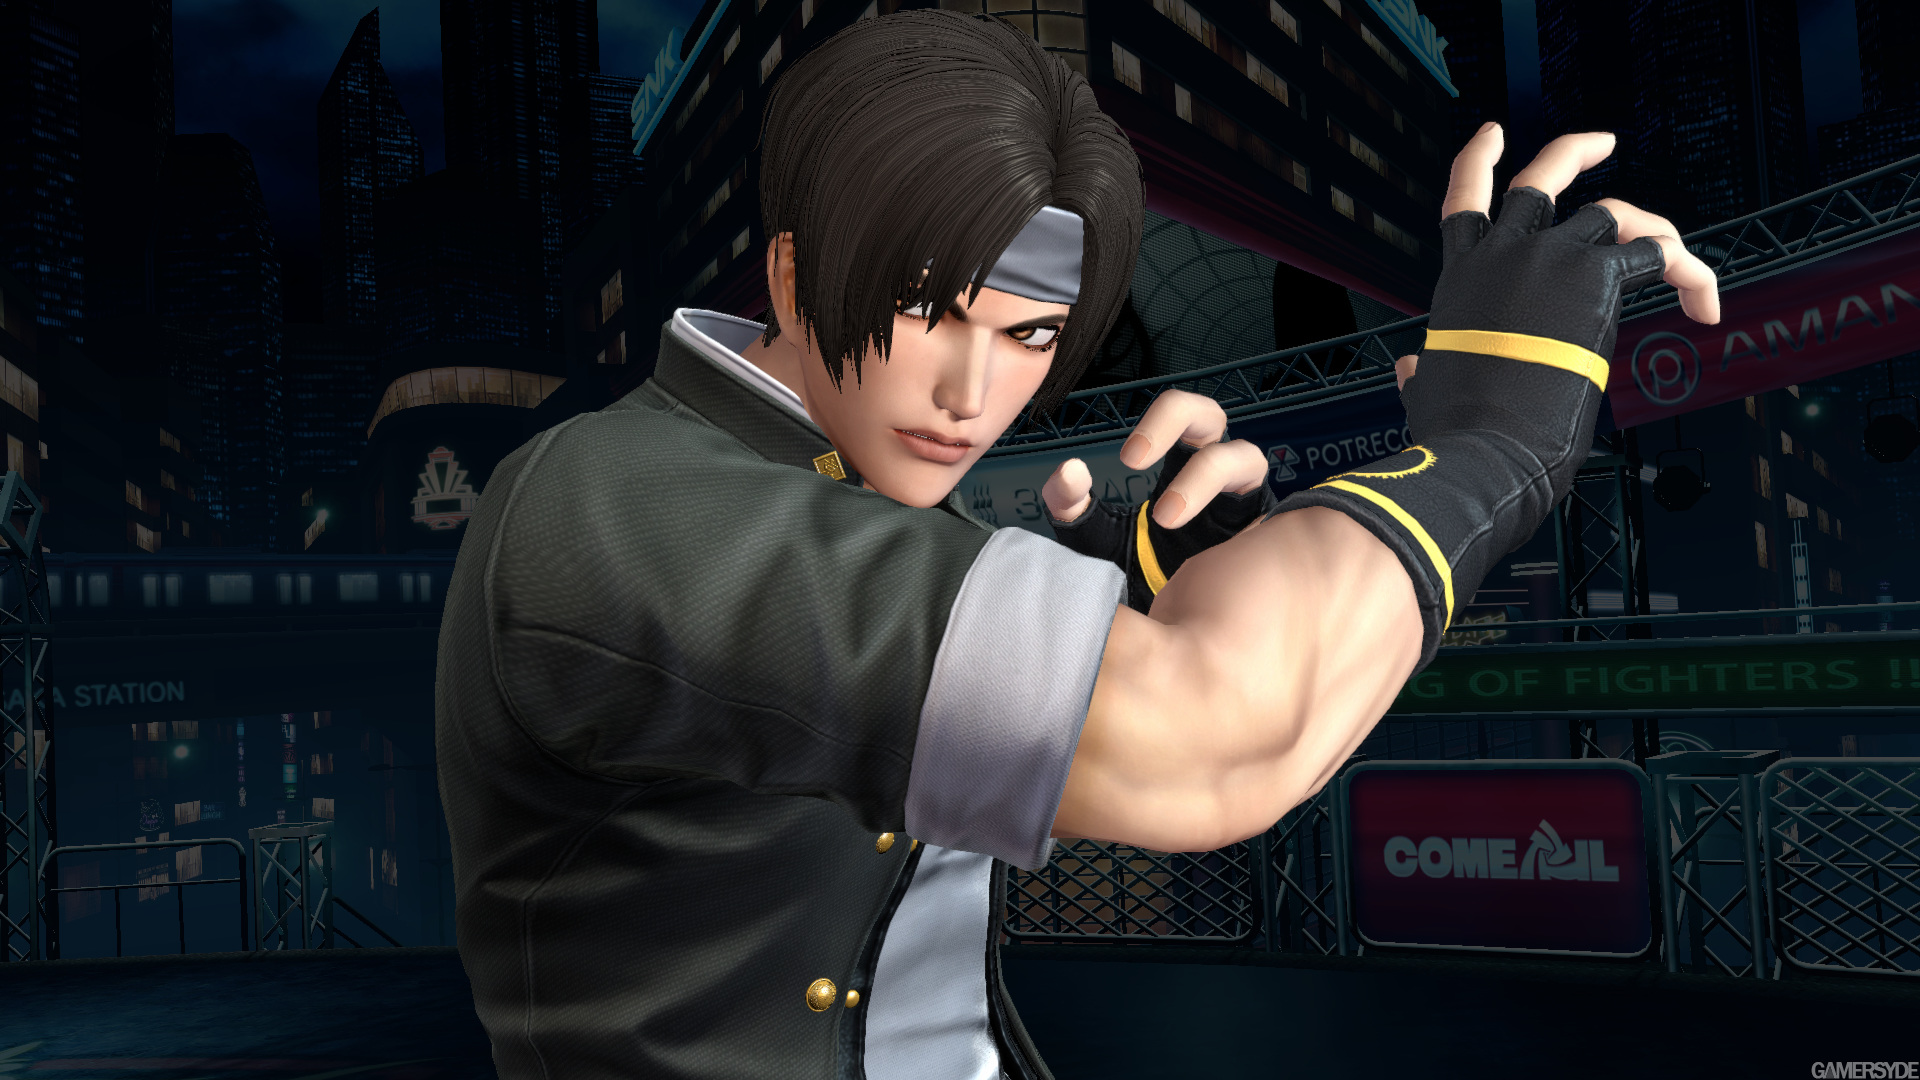 image_the_king_of_fighters_xiv-31595-3386_0001.jpg